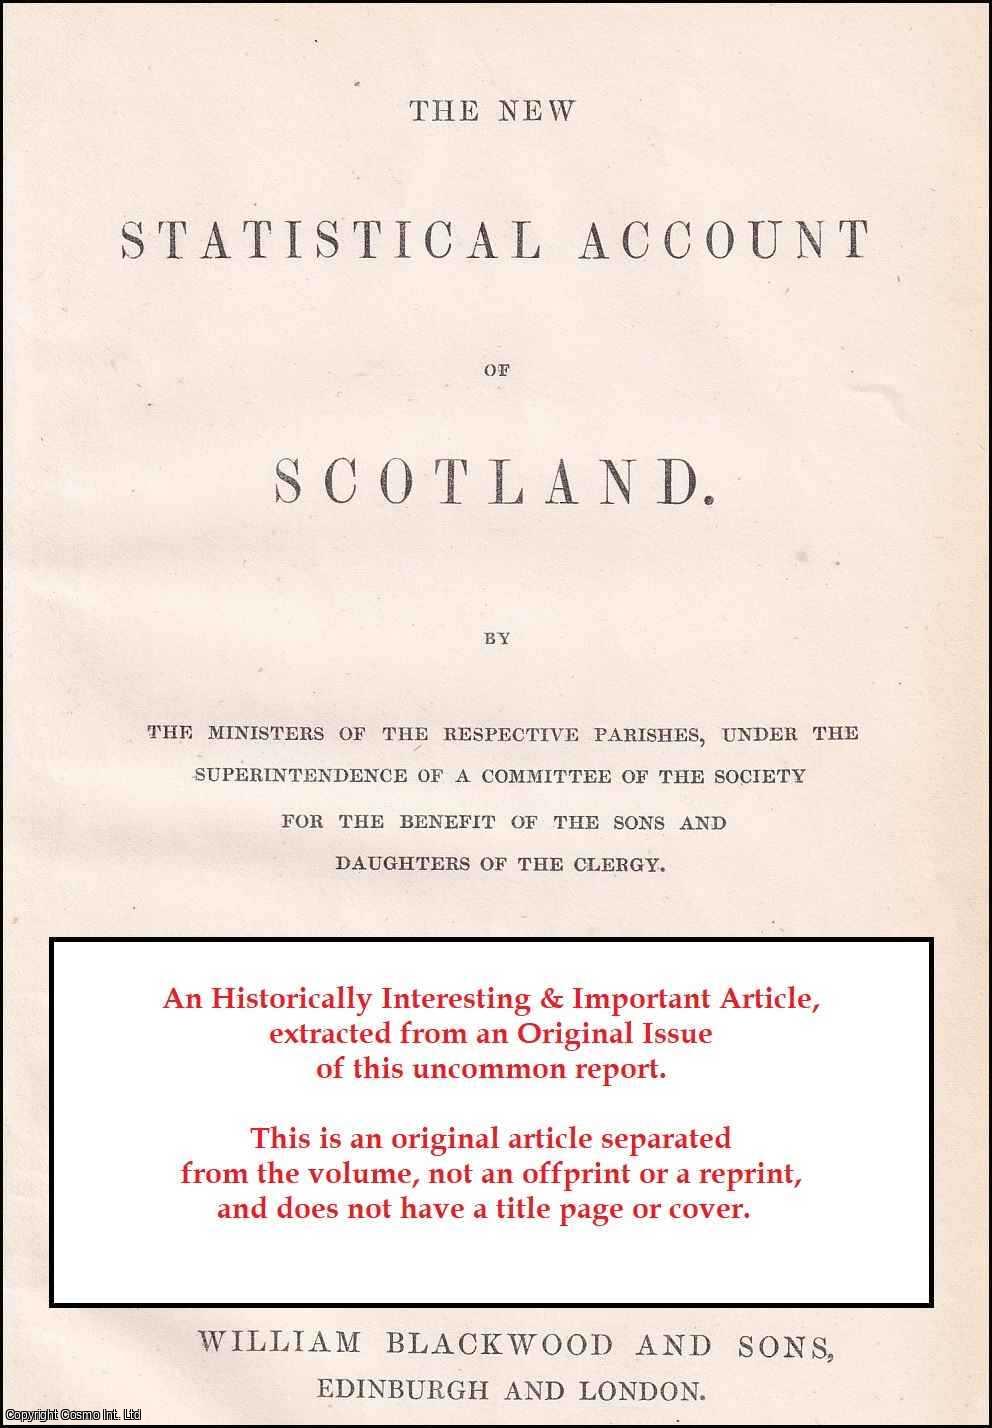 Rev. Adam Forman - Parish of Innerwick. Presbytery of Dunbar, Synod of Lothian and Tweeddale. An uncommon original article from The New Statistical Account of Scotland, 1845.